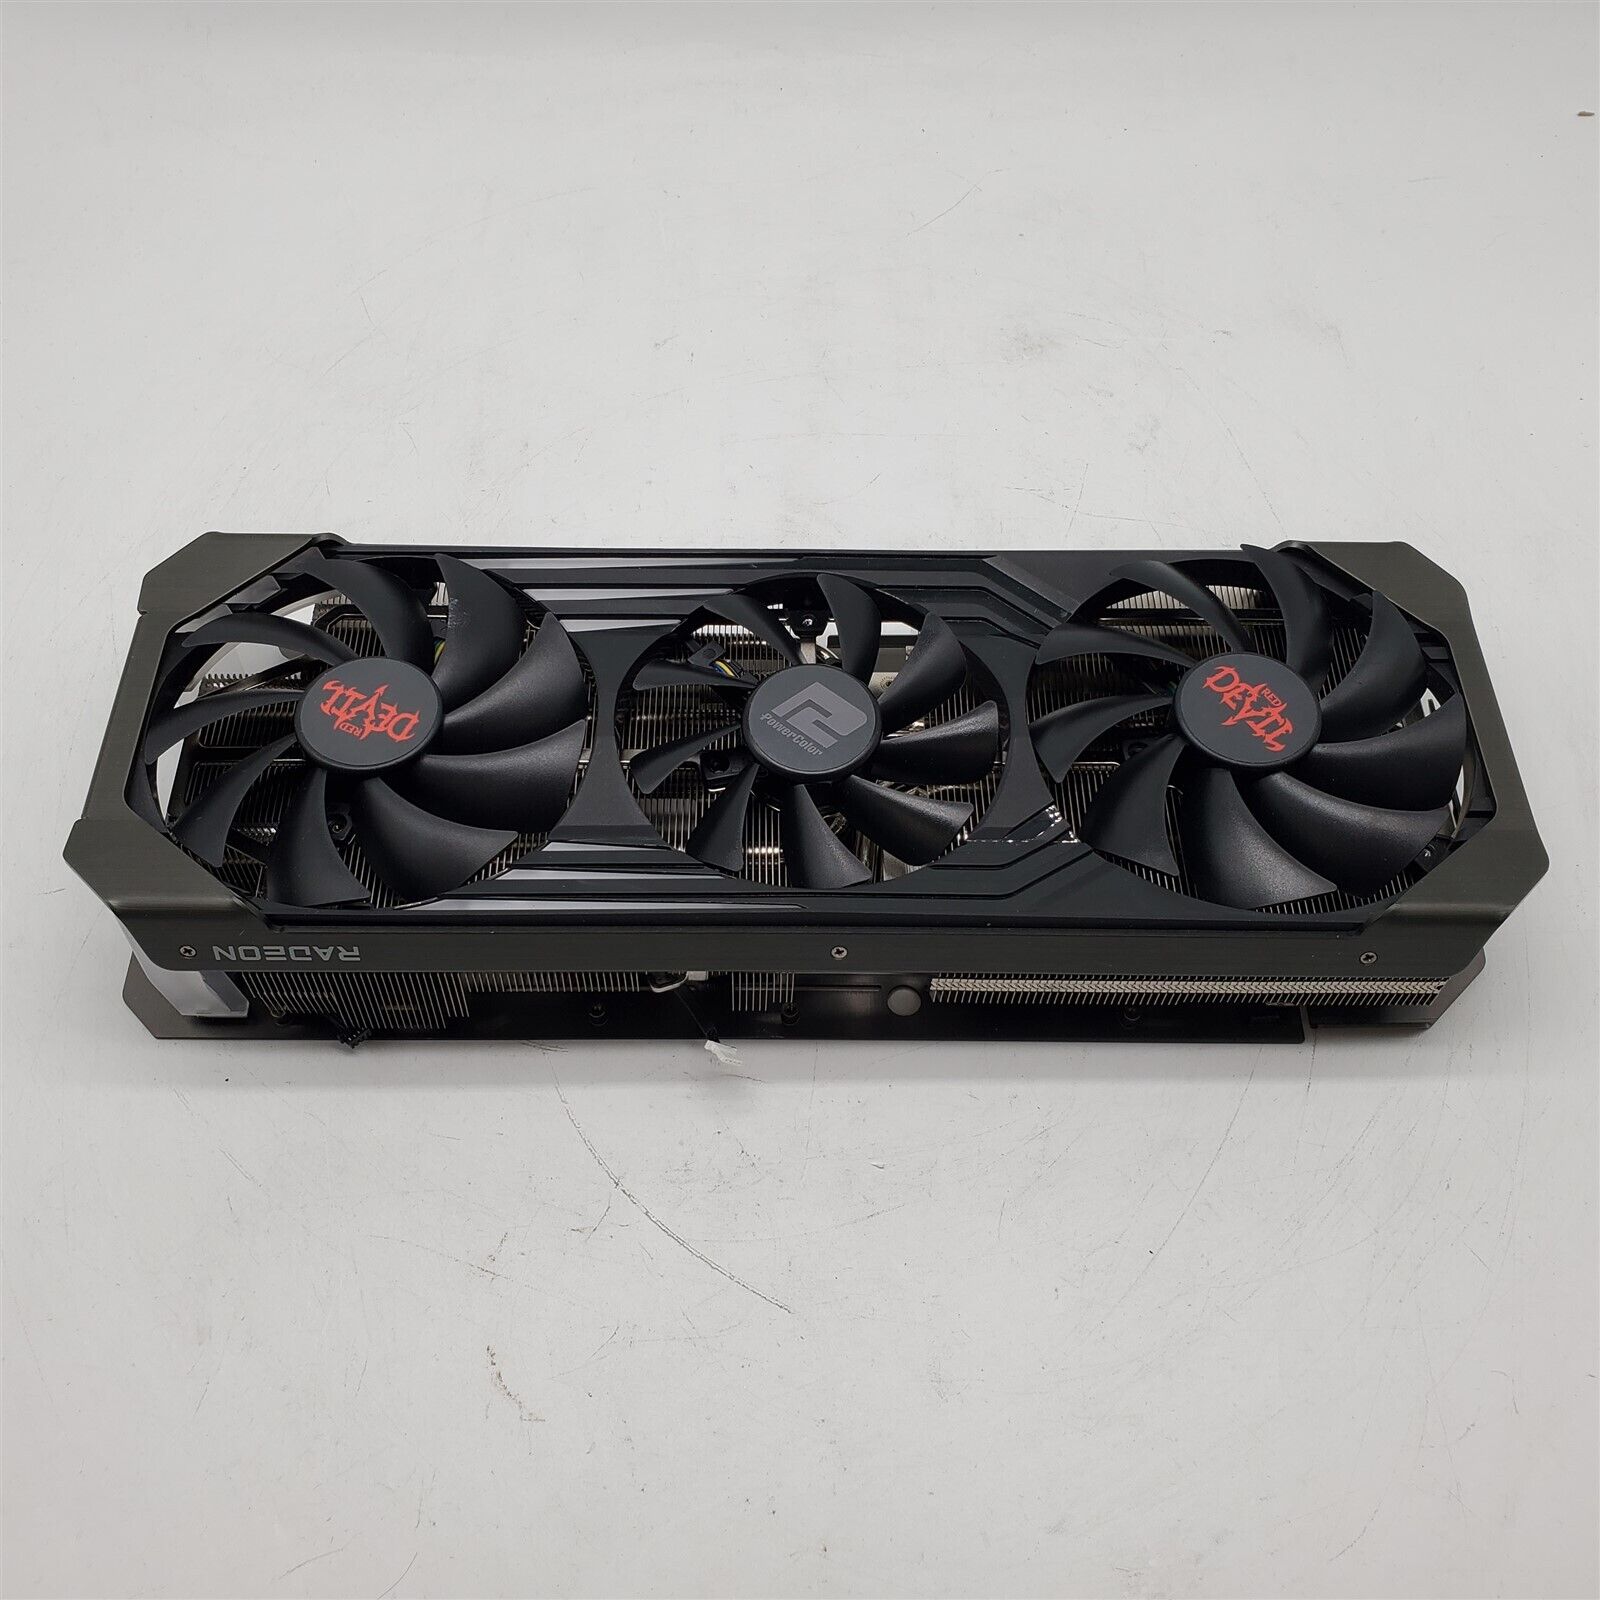 SHROUD ONLY for PowerColor Red Devil AMD Radeon RX 6750 XT Graphics Card